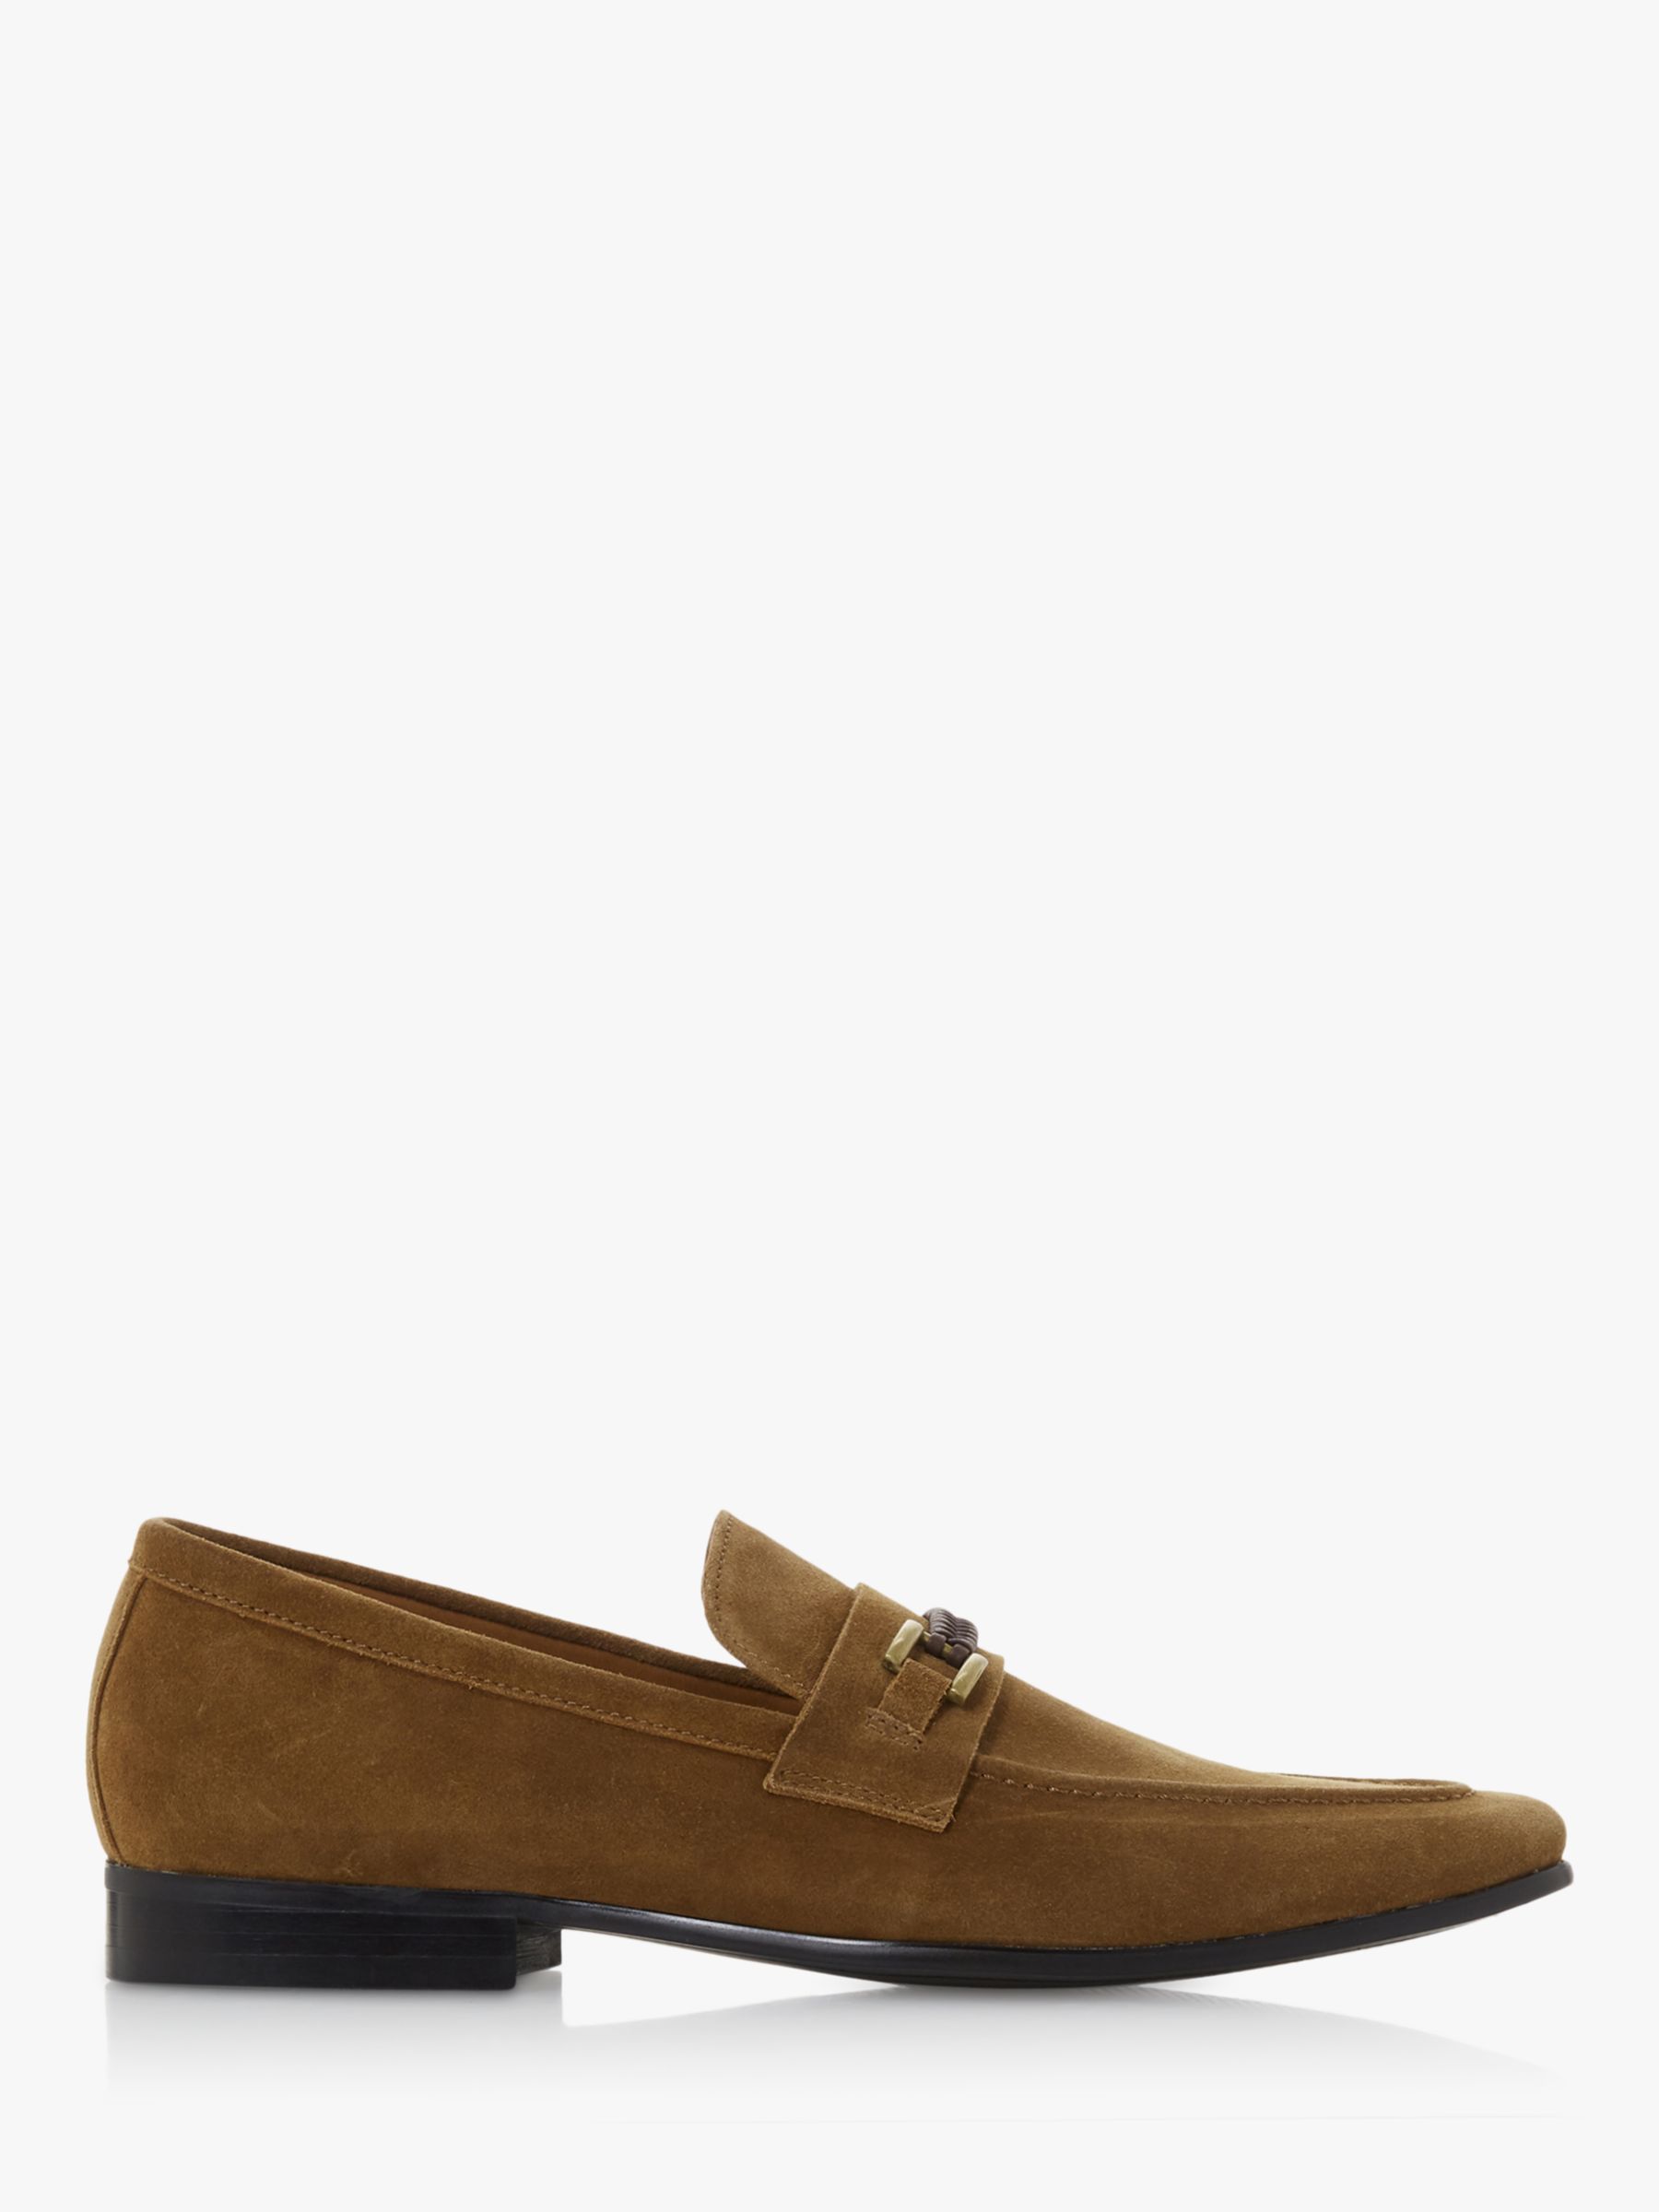 Dune Stream Suede Loafers